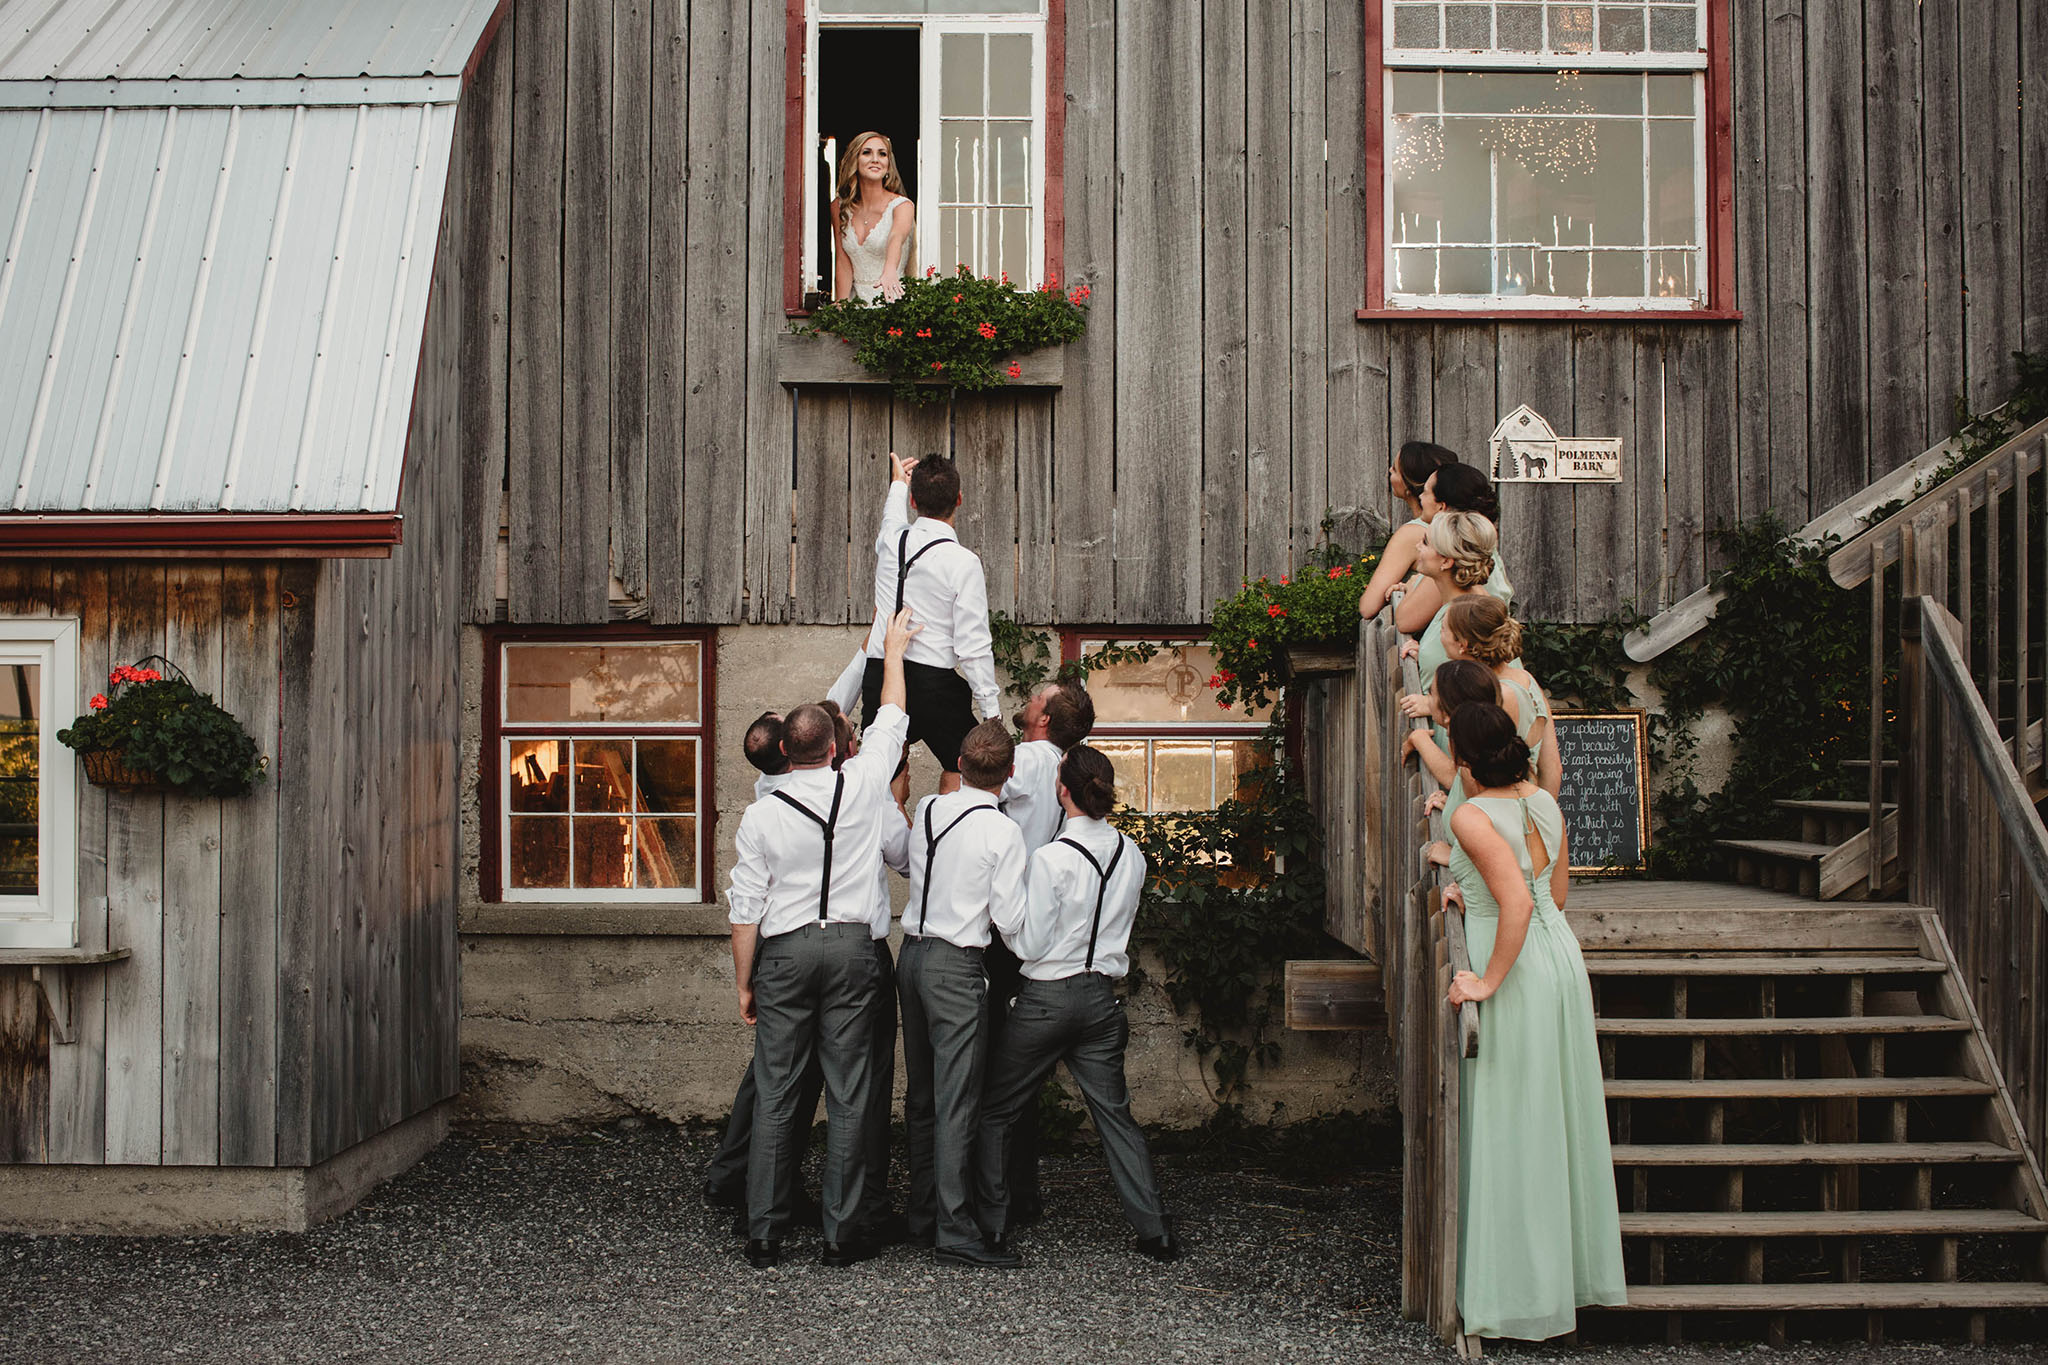 Bride looking out Barn window and below are the groom with the groomsmen lifting him up to the window.